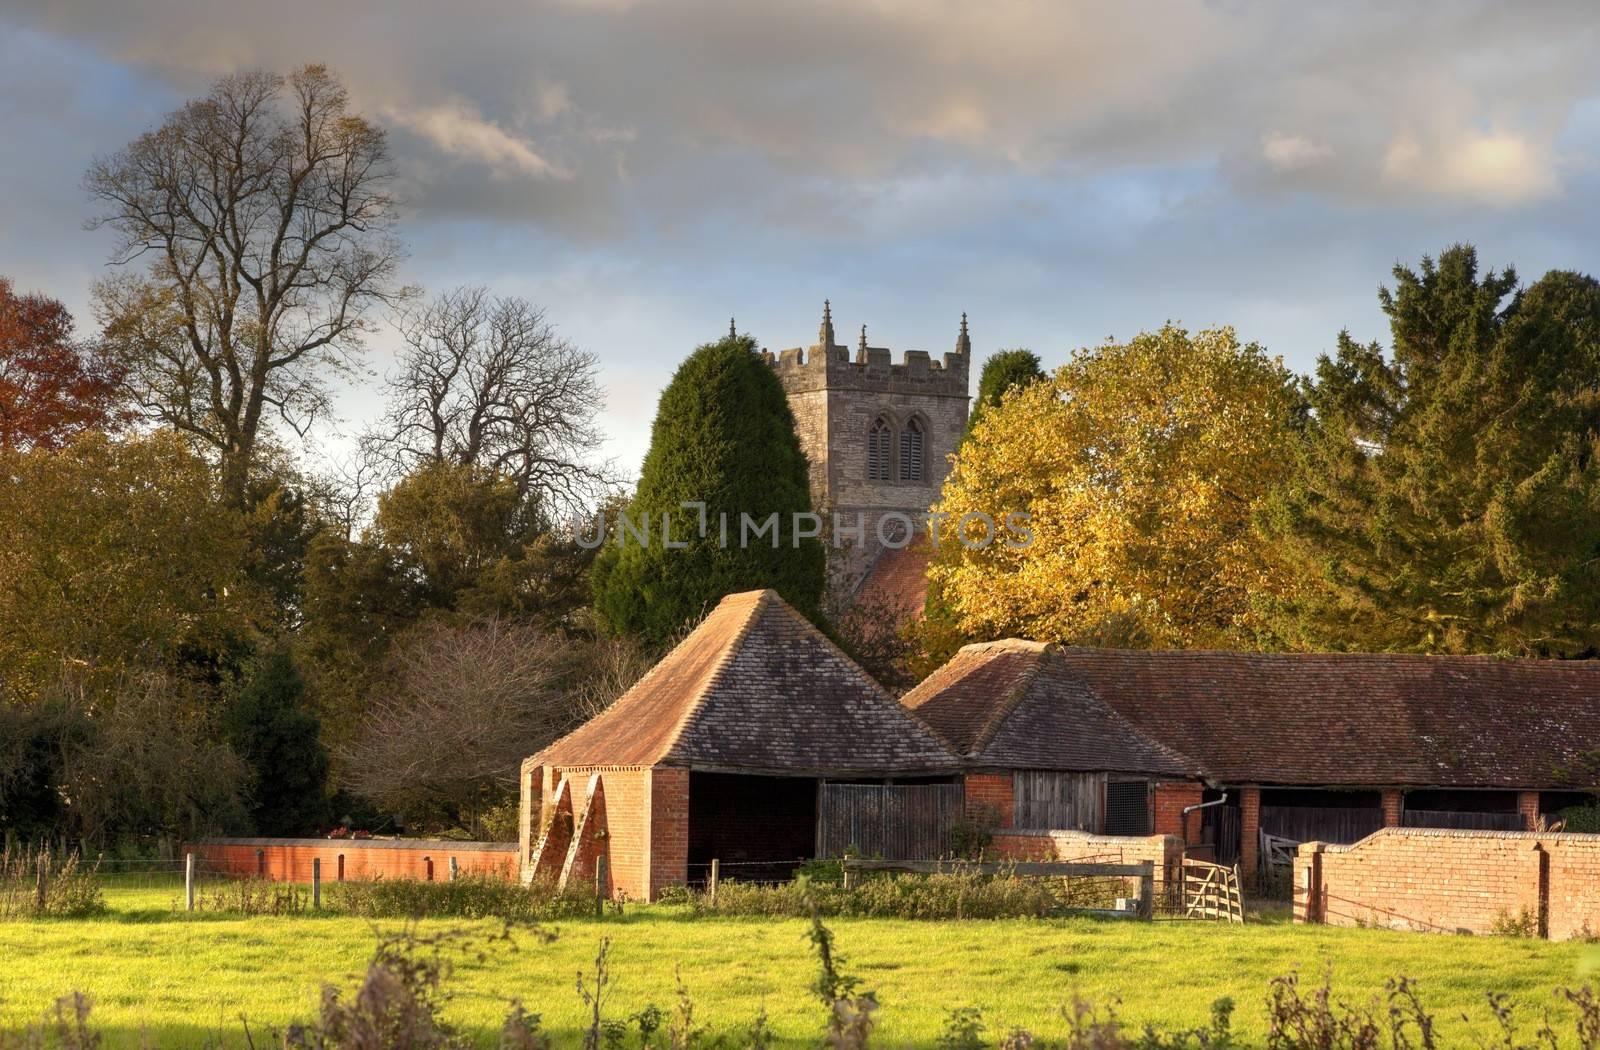 The Warwickshire village of Aston Cantlow, showing old church and barns, England.